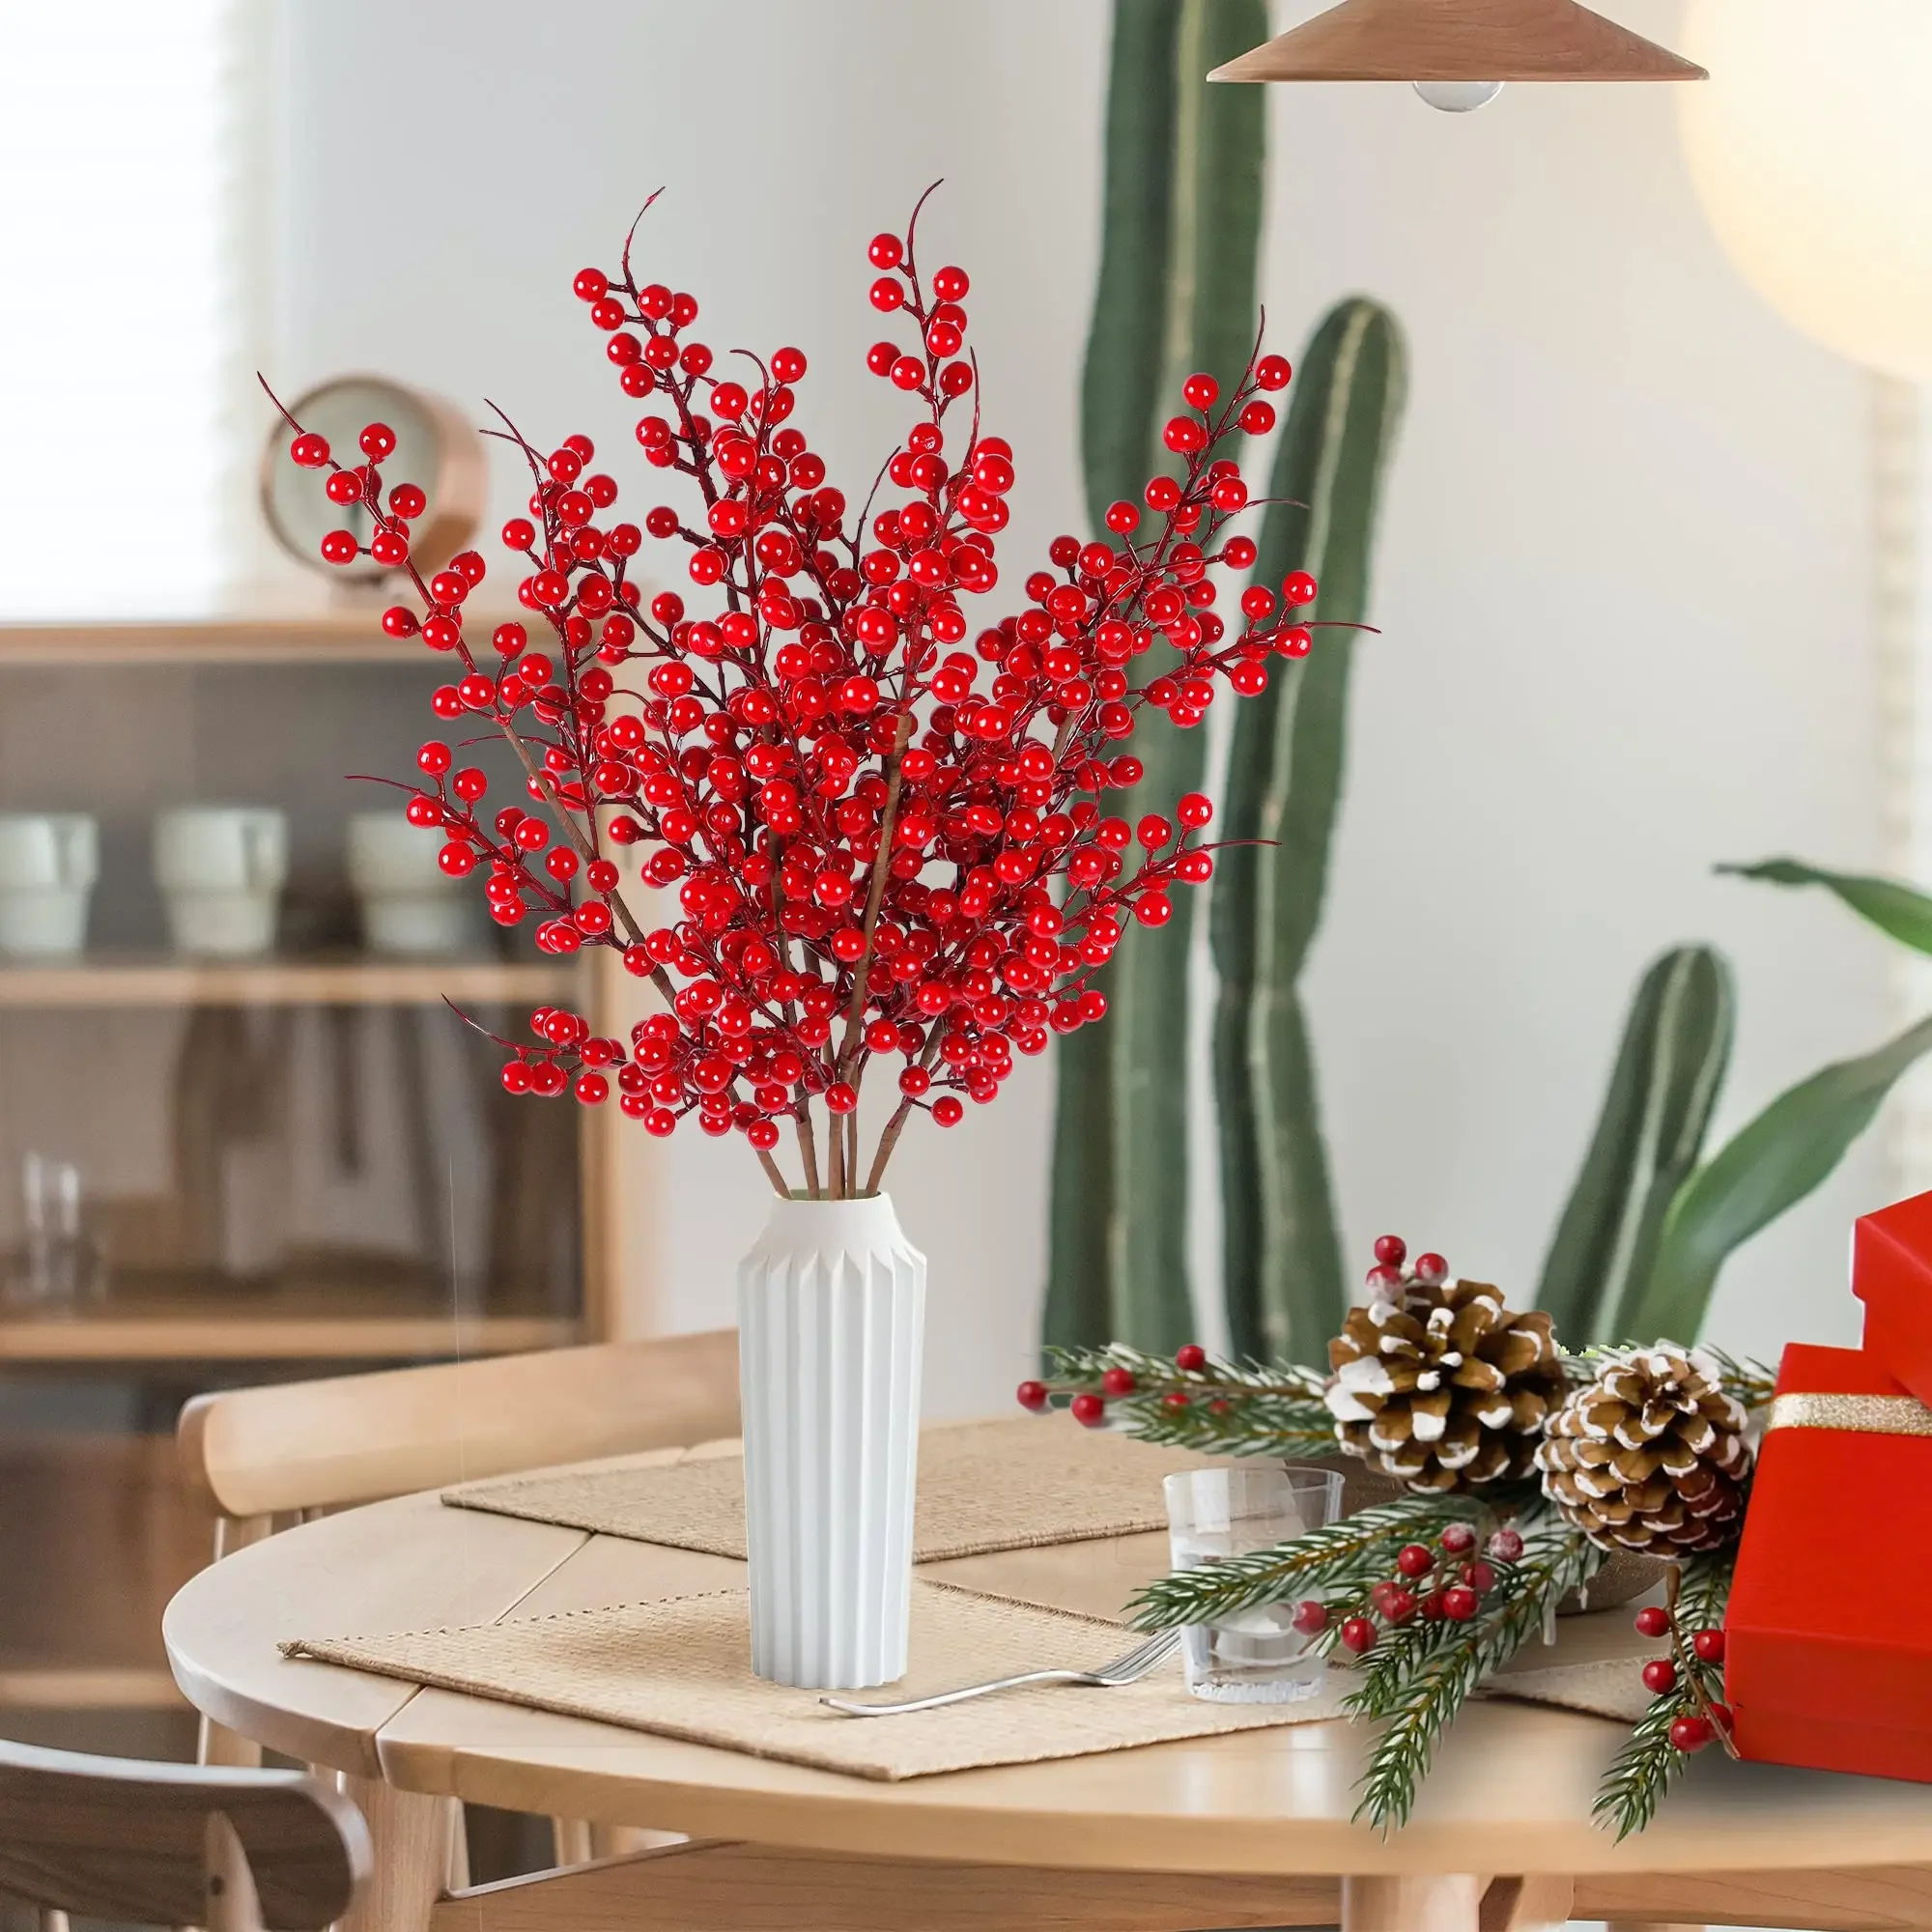 Holly Berry Stem Christmas Berries, Fake Red Berry Branch, Red Berry Picks,  Decor - AliExpress